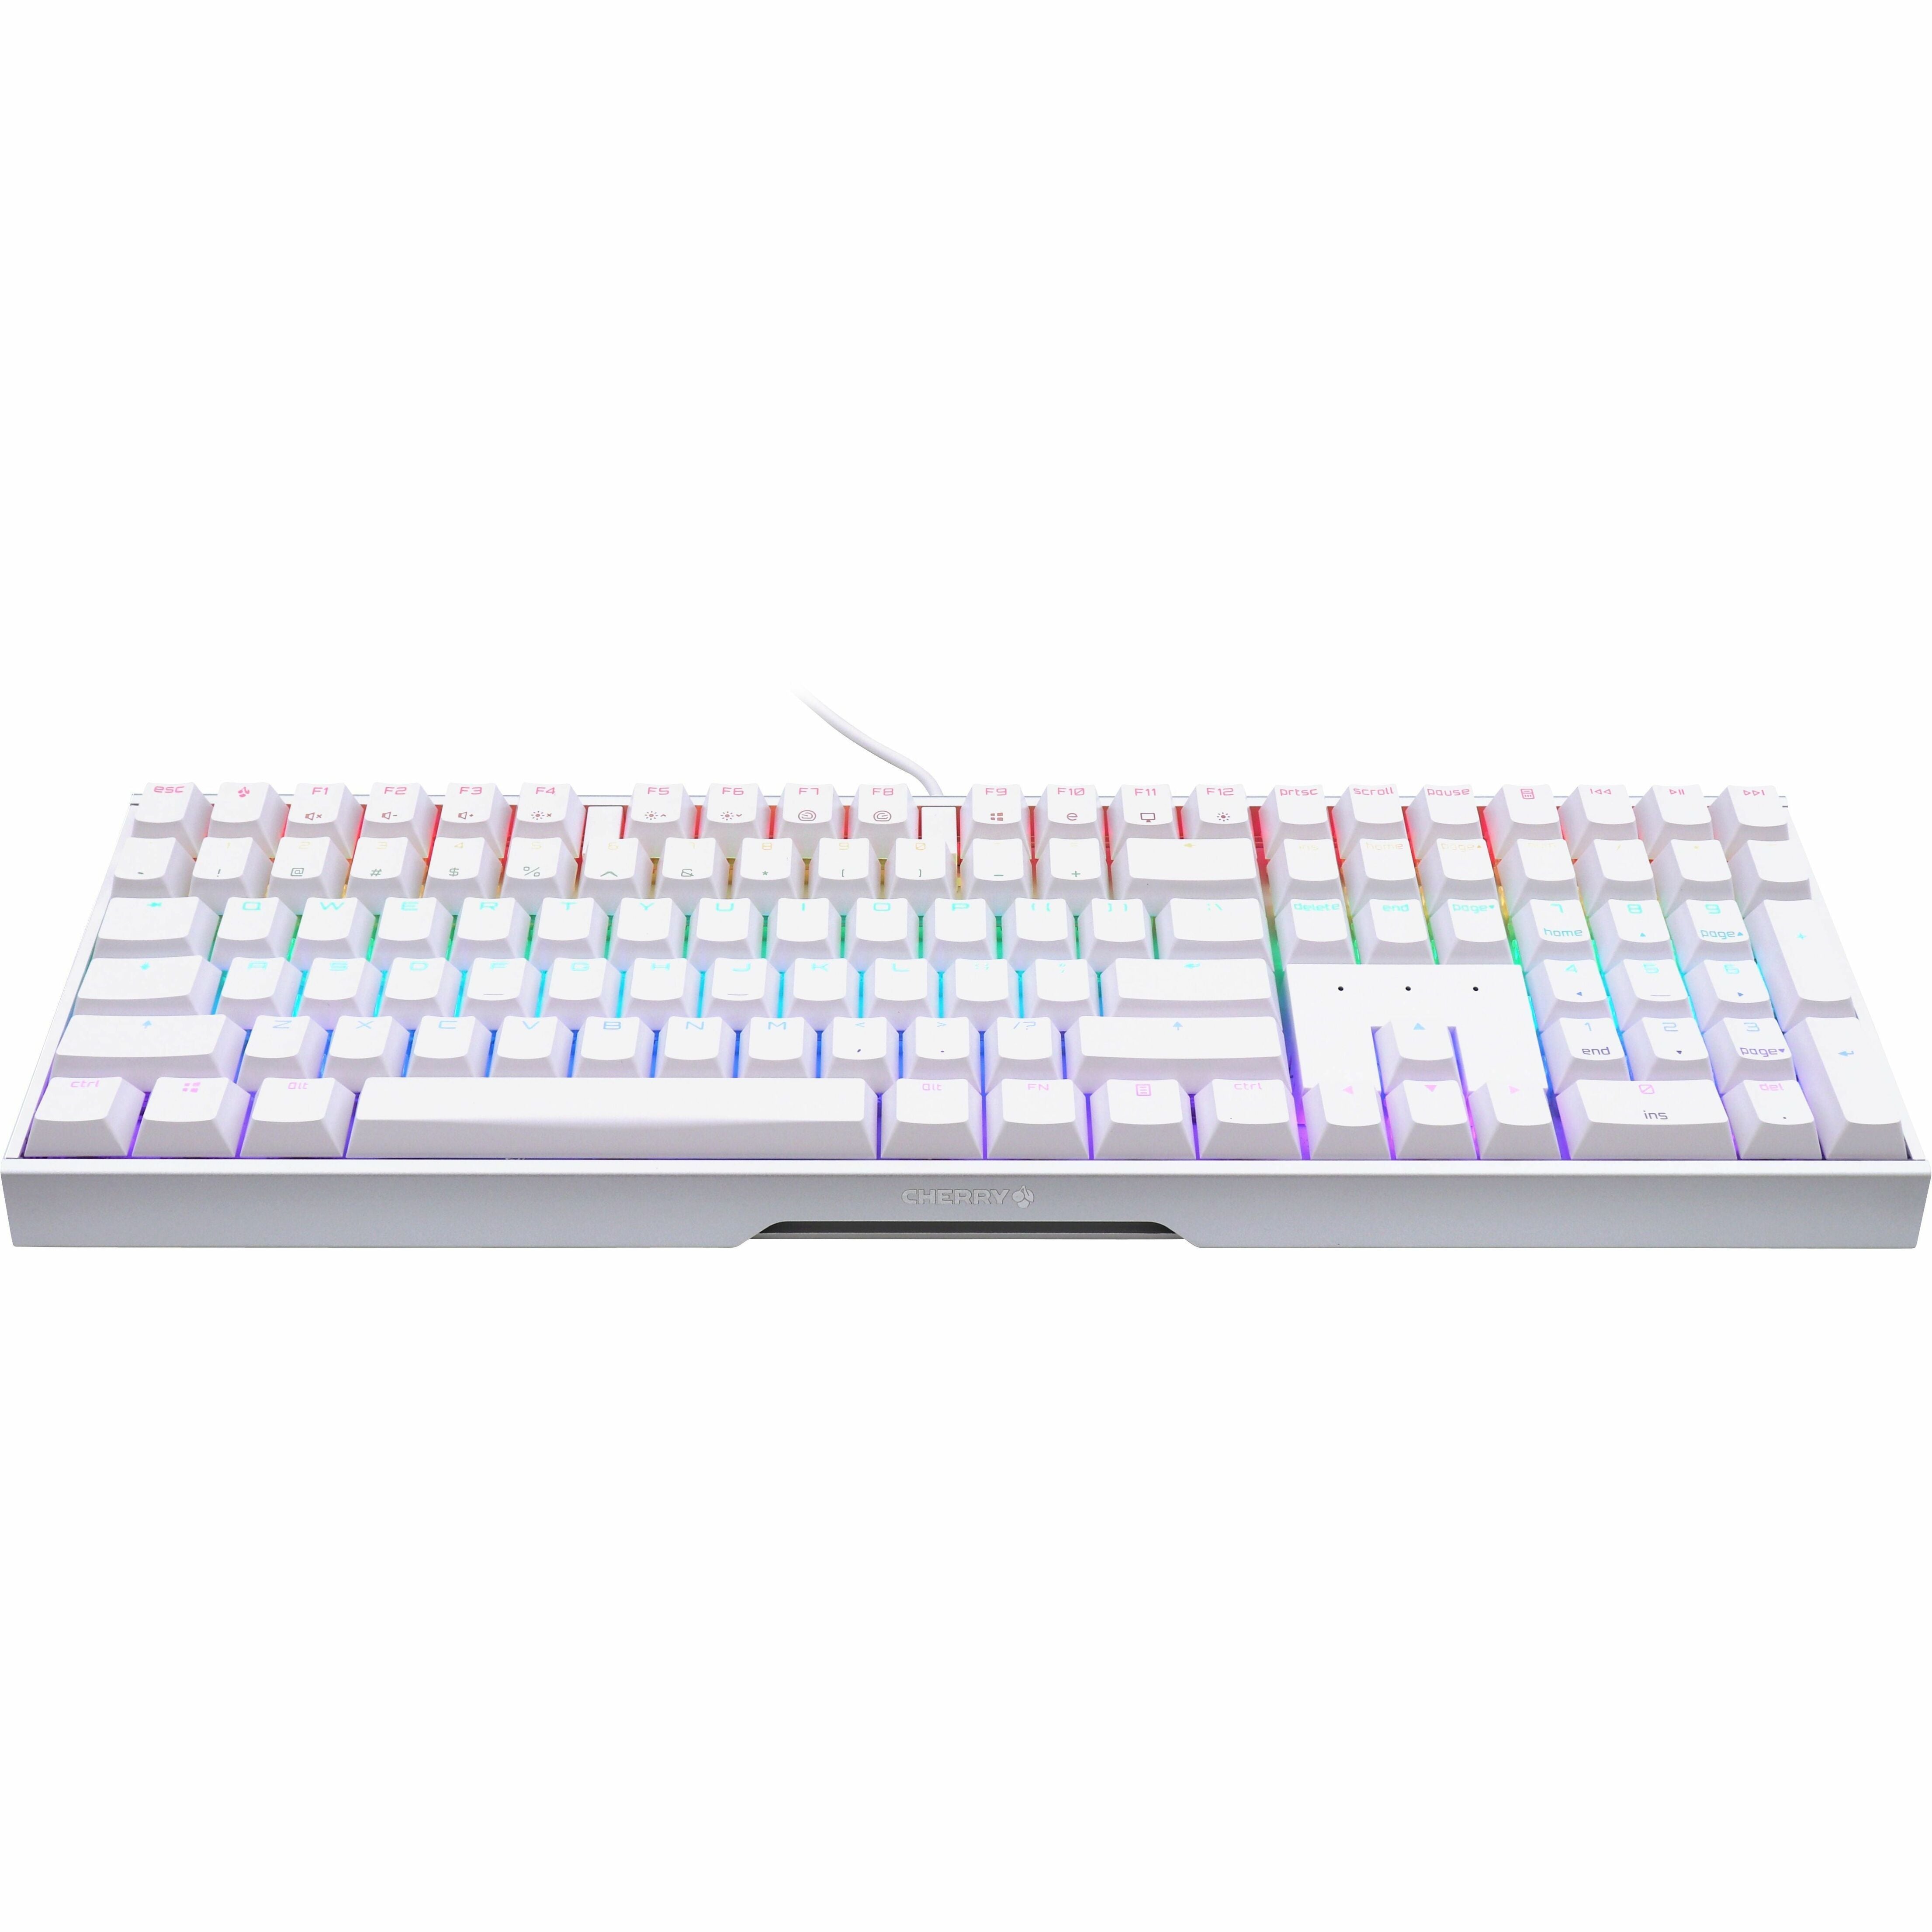 CHERRY G80-3874HWAUS-0 MX BOARD 3.0 S Gaming Keyboard, Backlit RGB LED, Anti-ghosting, Cable Connectivity